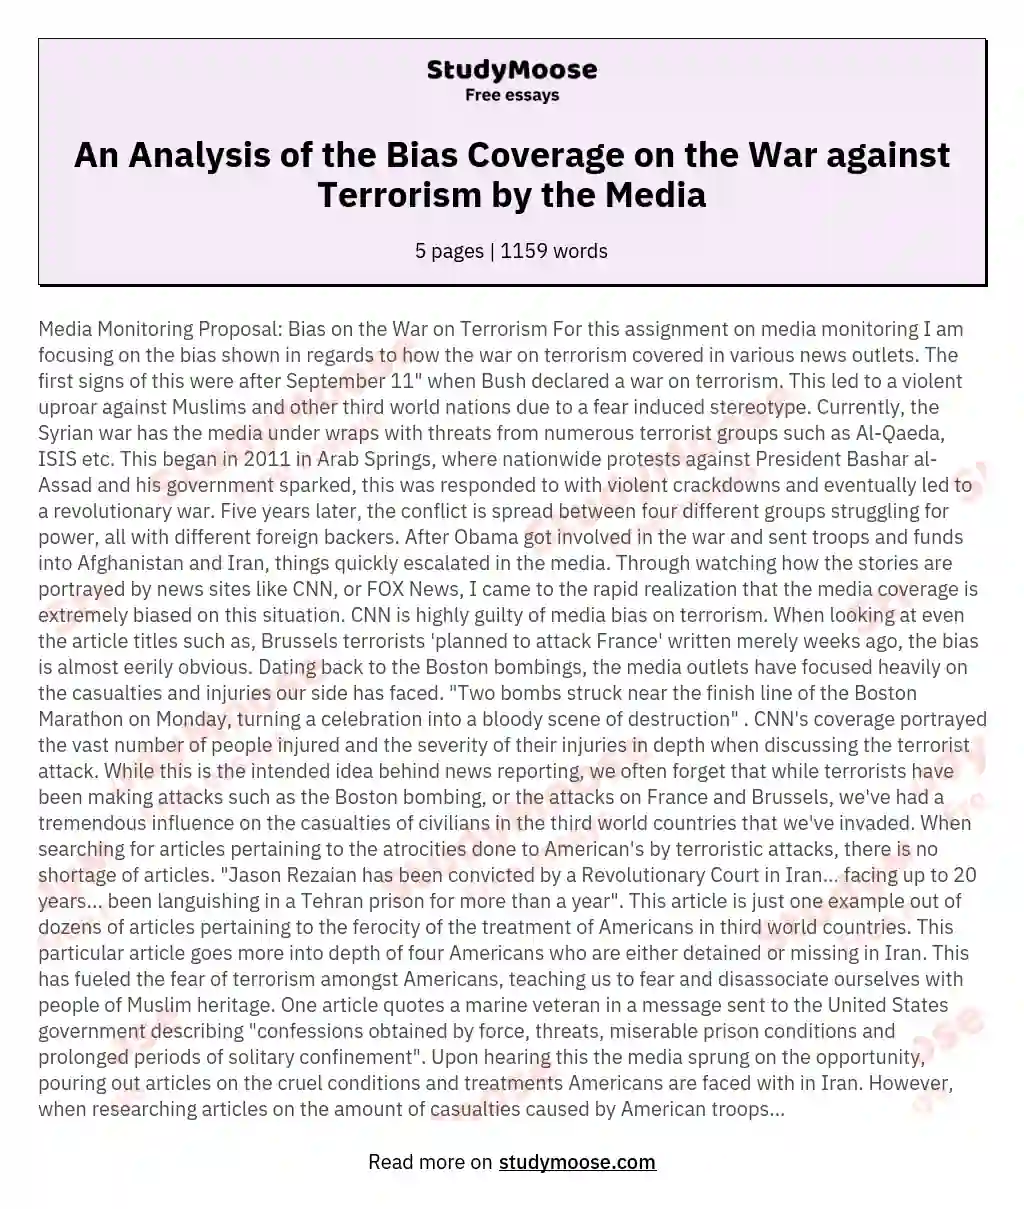 An Analysis of the Bias Coverage on the War against Terrorism by the Media essay